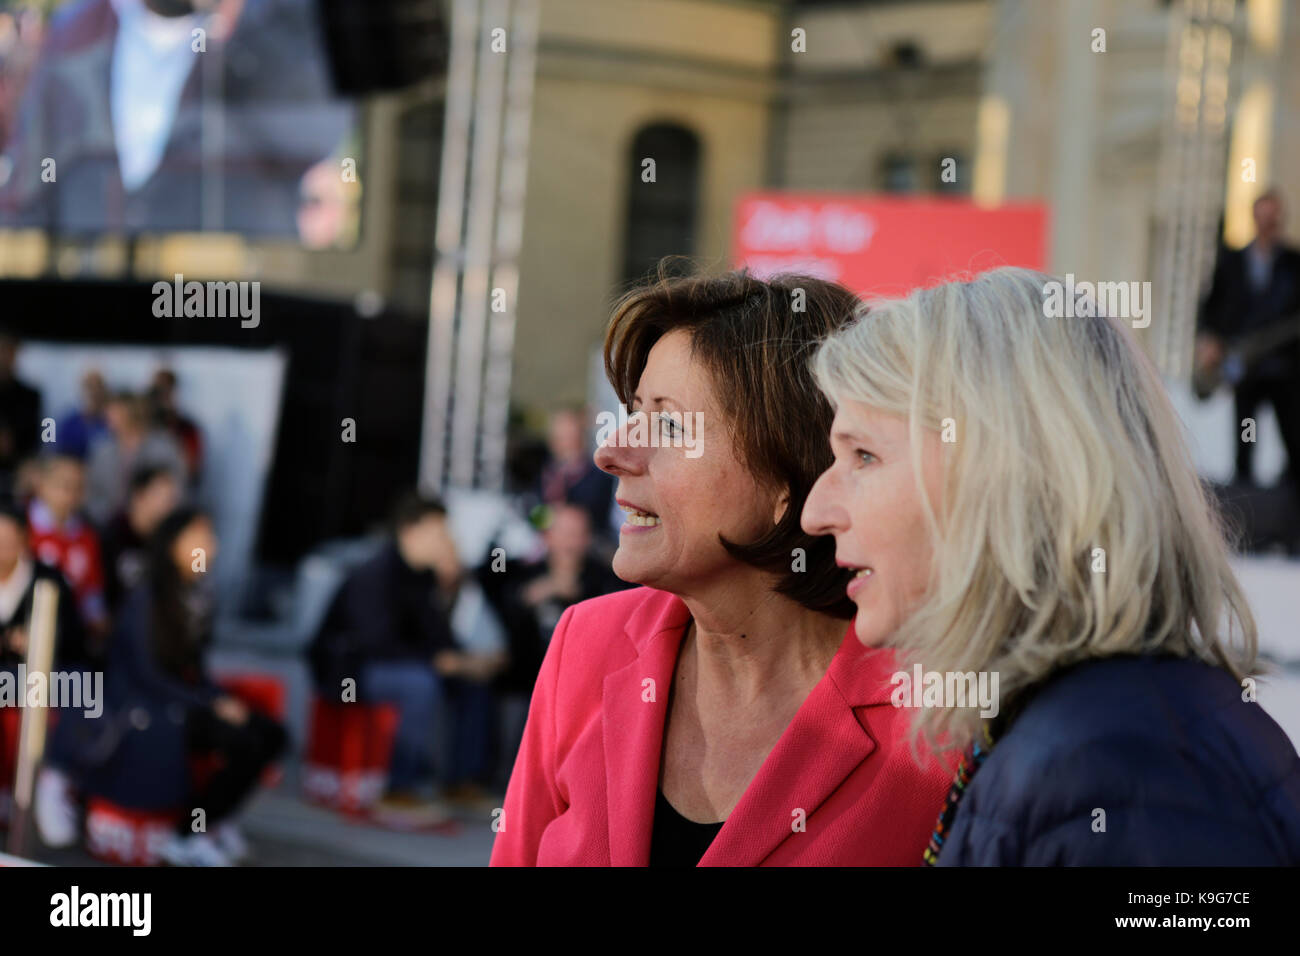 Berlin, Germany. 22nd Sep, 2017. Malu Dreyer, the Minister President of Rhineland-Palatinate, is pictured at the rally. The candidate for the German Chancellorship of the SPD (Social Democratic Party of Germany) was the main speaker at a large rally in the centre of Berlin, two days ahead of the German General Election. Credit: Michael Debets/Pacific Press/Alamy Live News Stock Photo